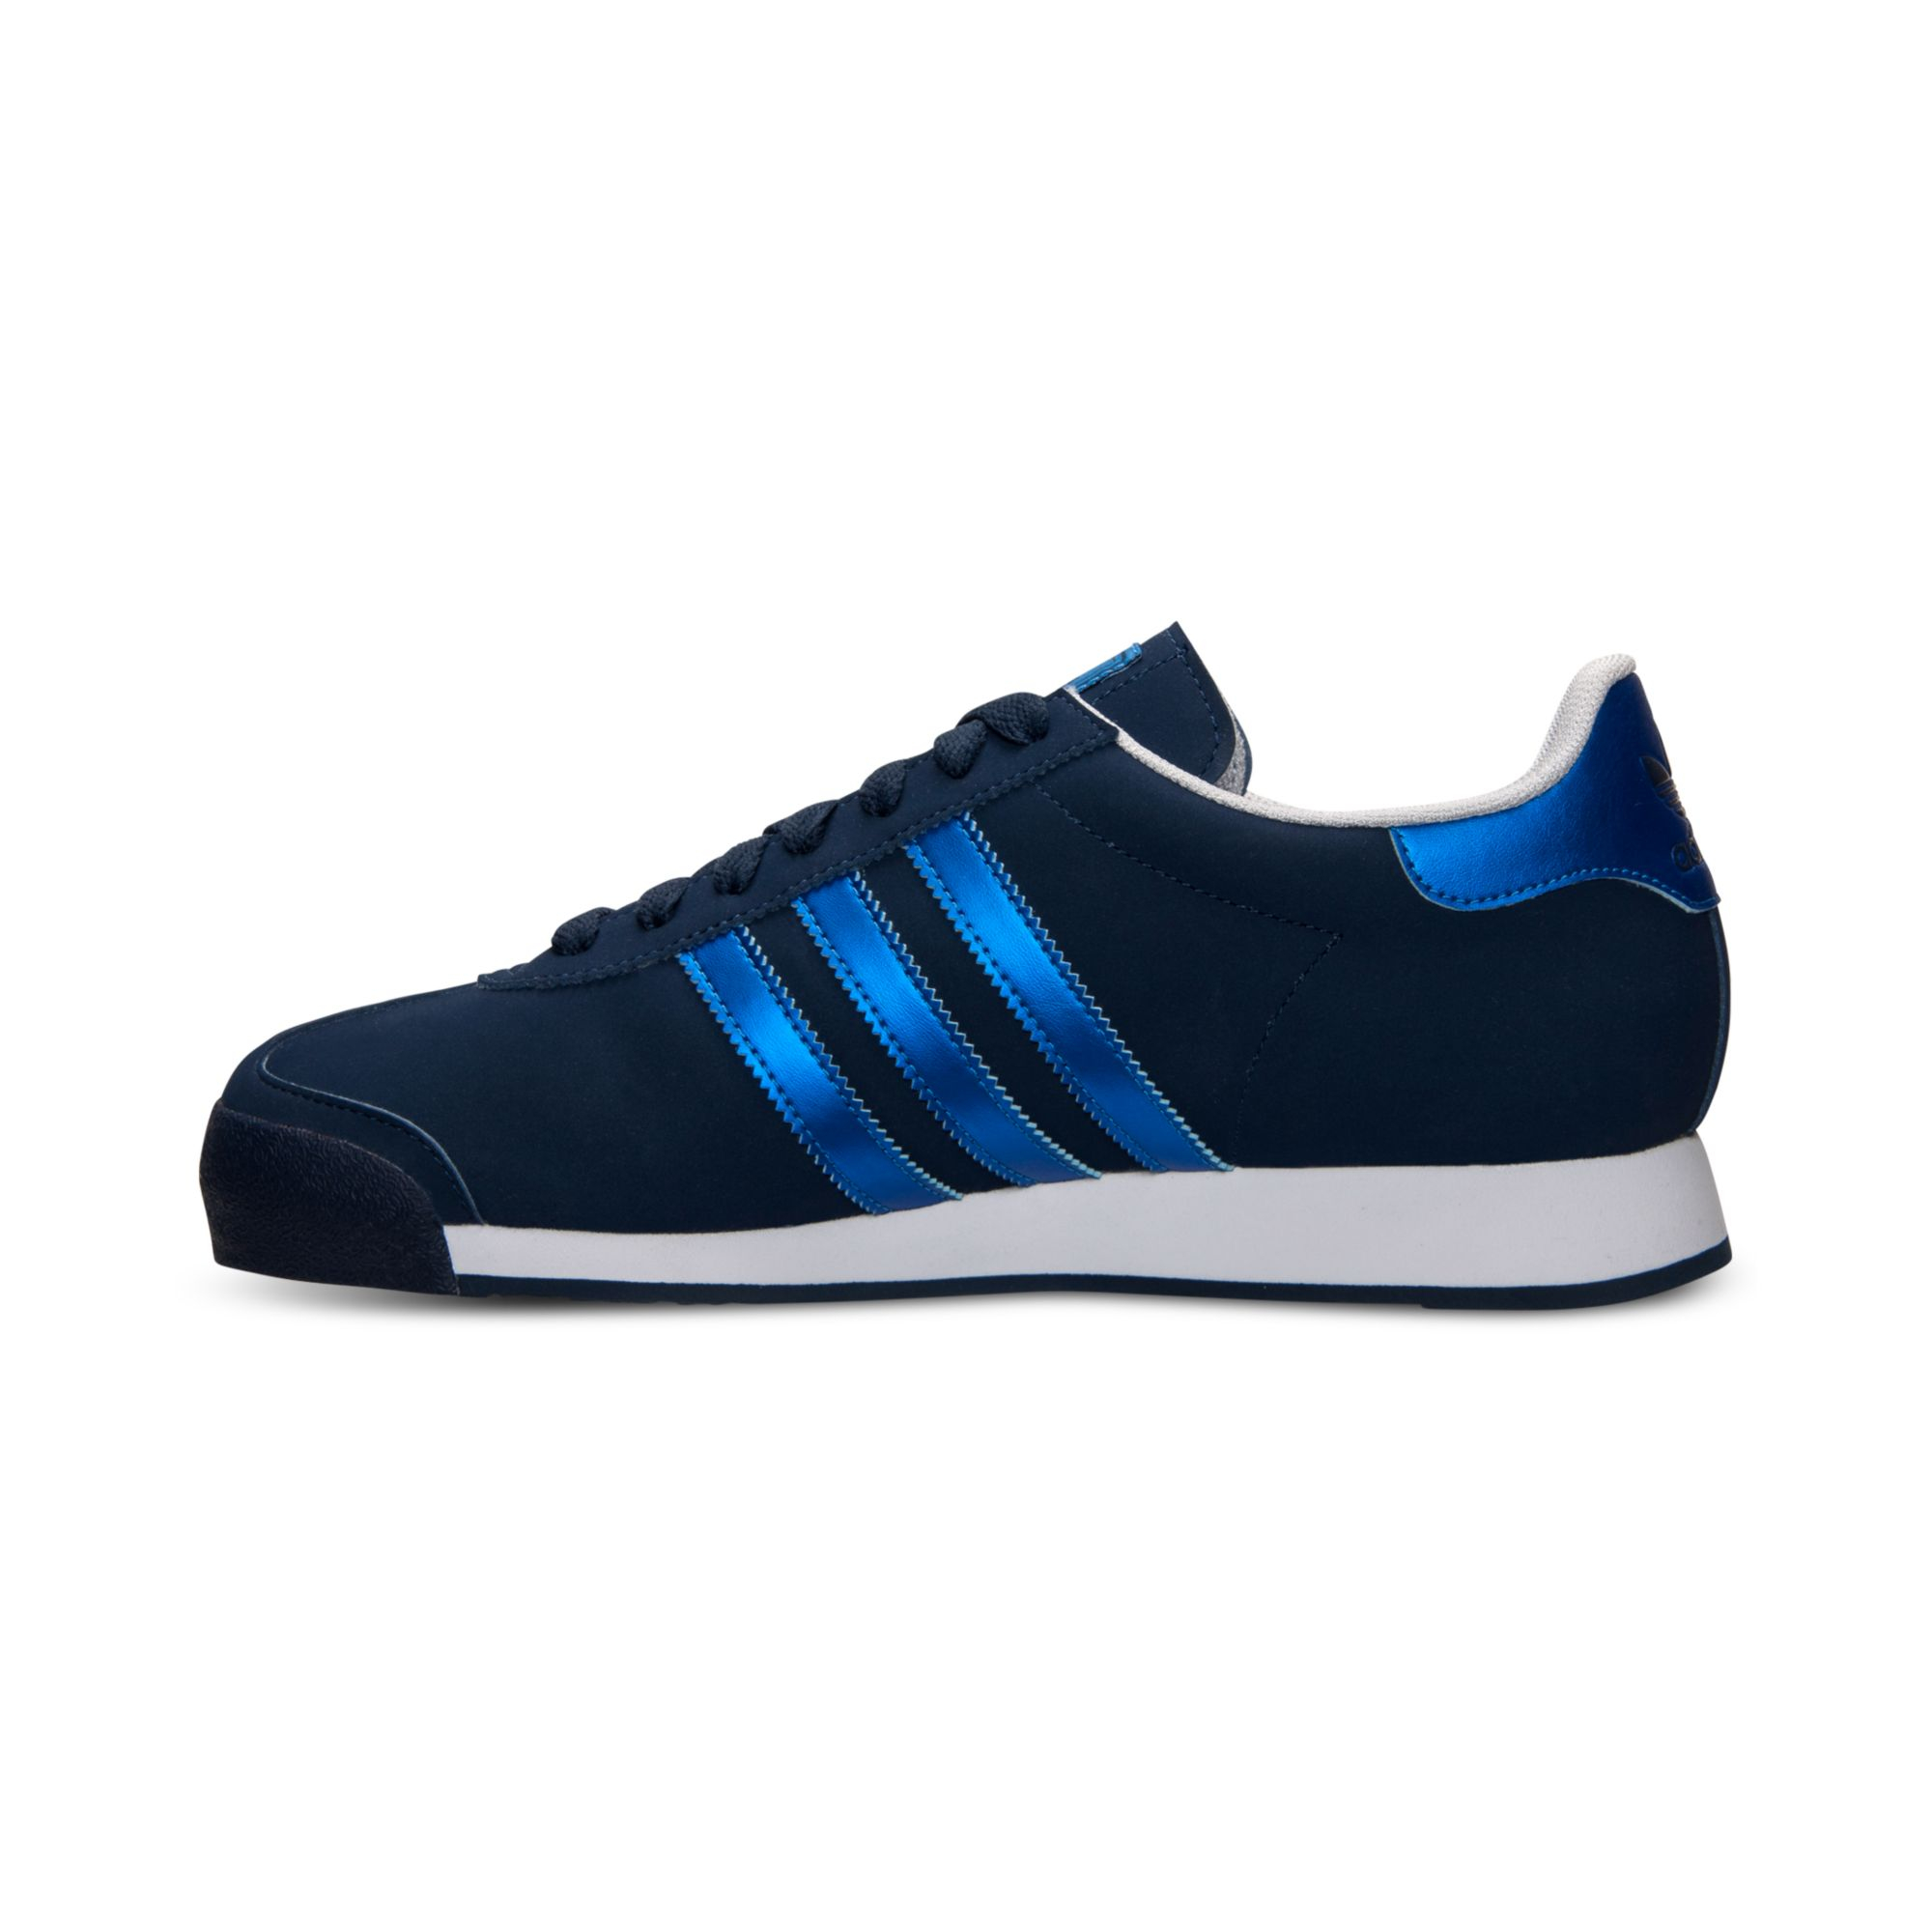 adidas Men'S Samoa Casual Sneakers From Finish Line in Navy/Blue/White ...